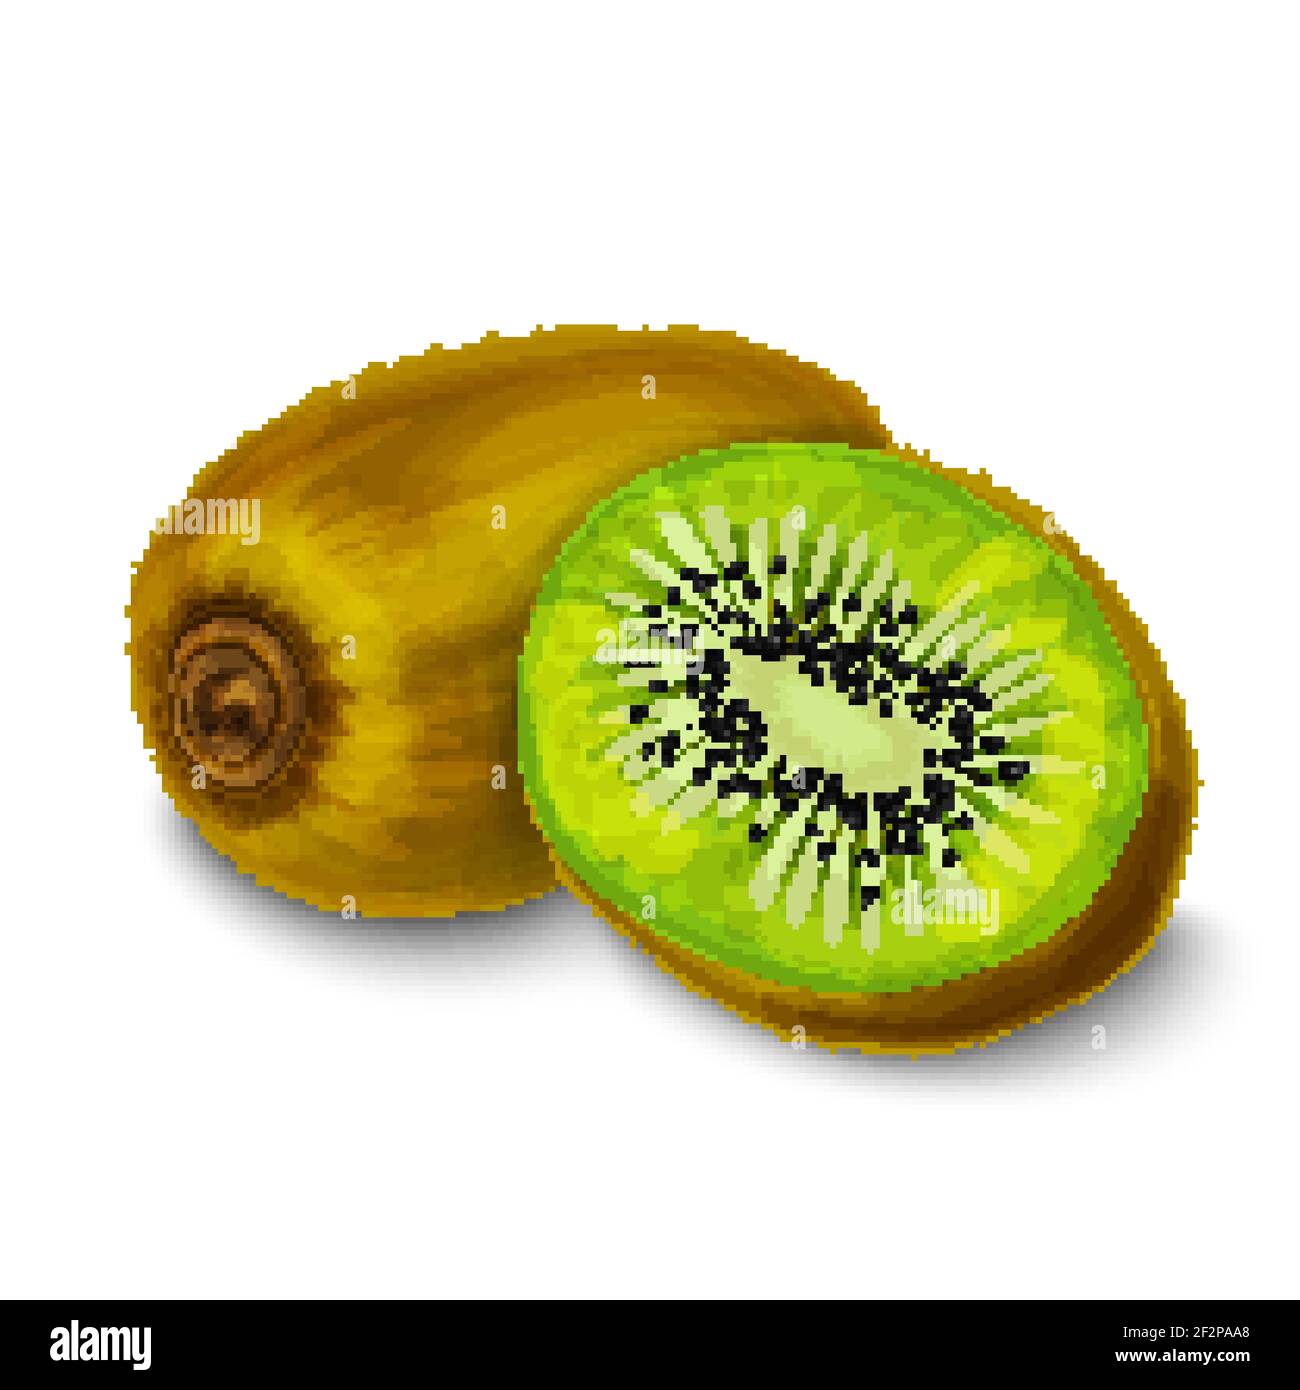 Natural organic sweet cut and sliced kiwi with pips tropical fruit decorative poster or emblem isolated vector illustration Stock Vector